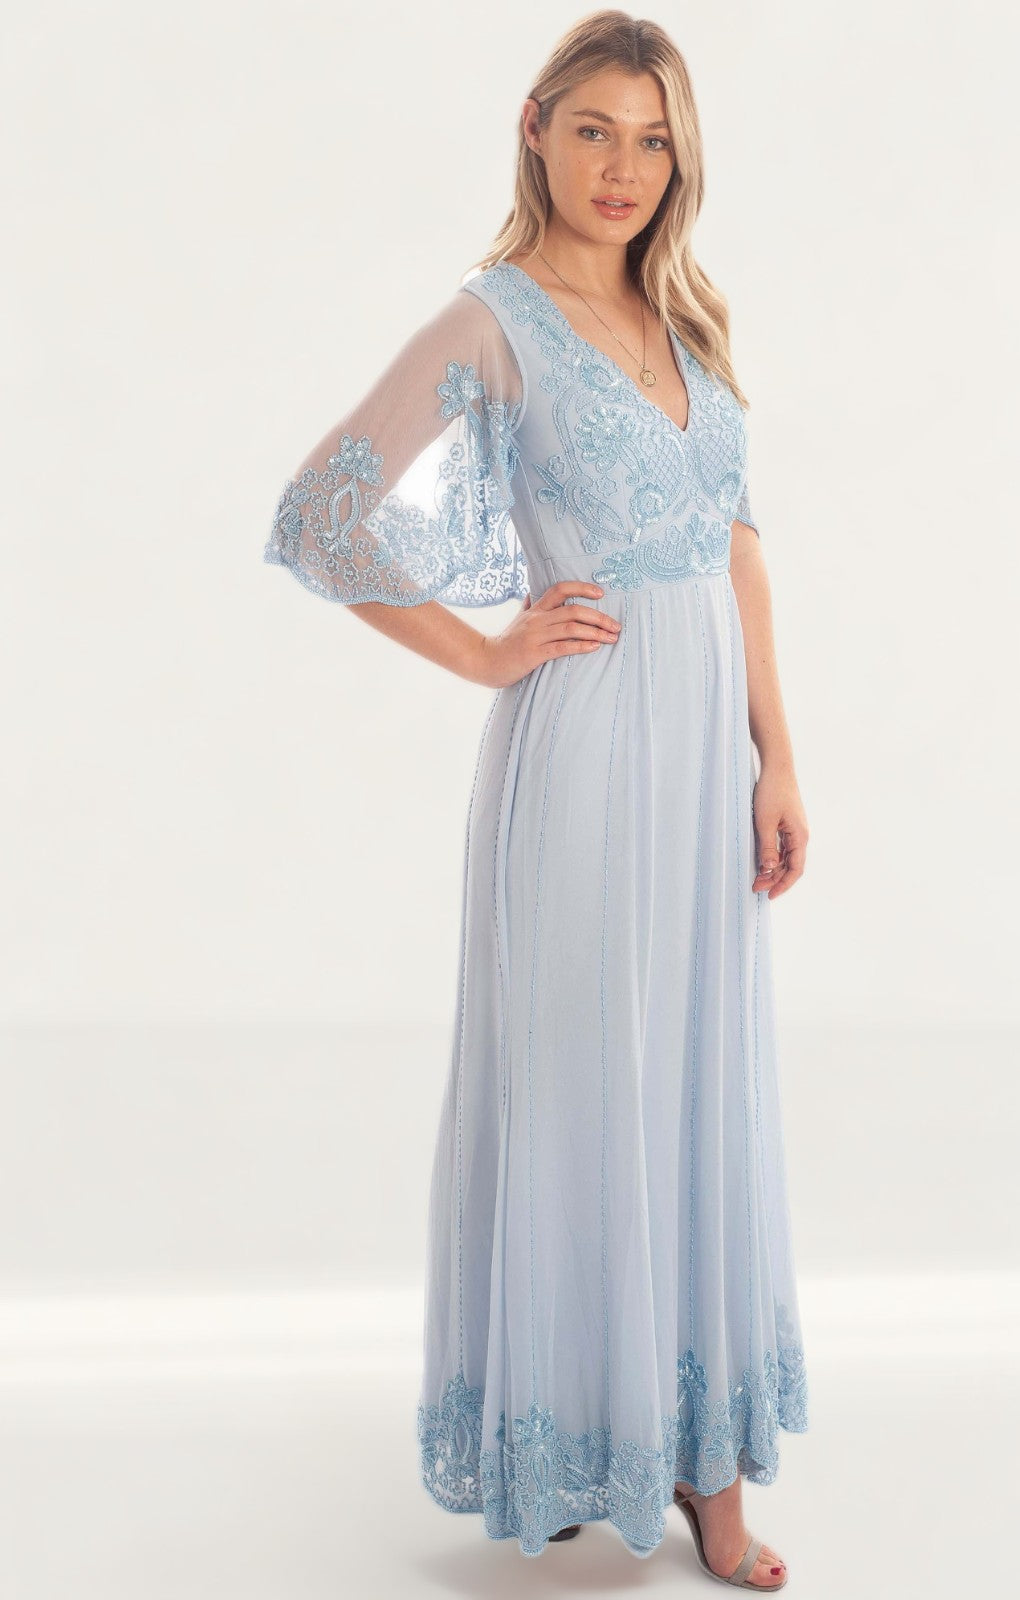 Frock & Frill Baby Blue Sequin Maxi Dress product image